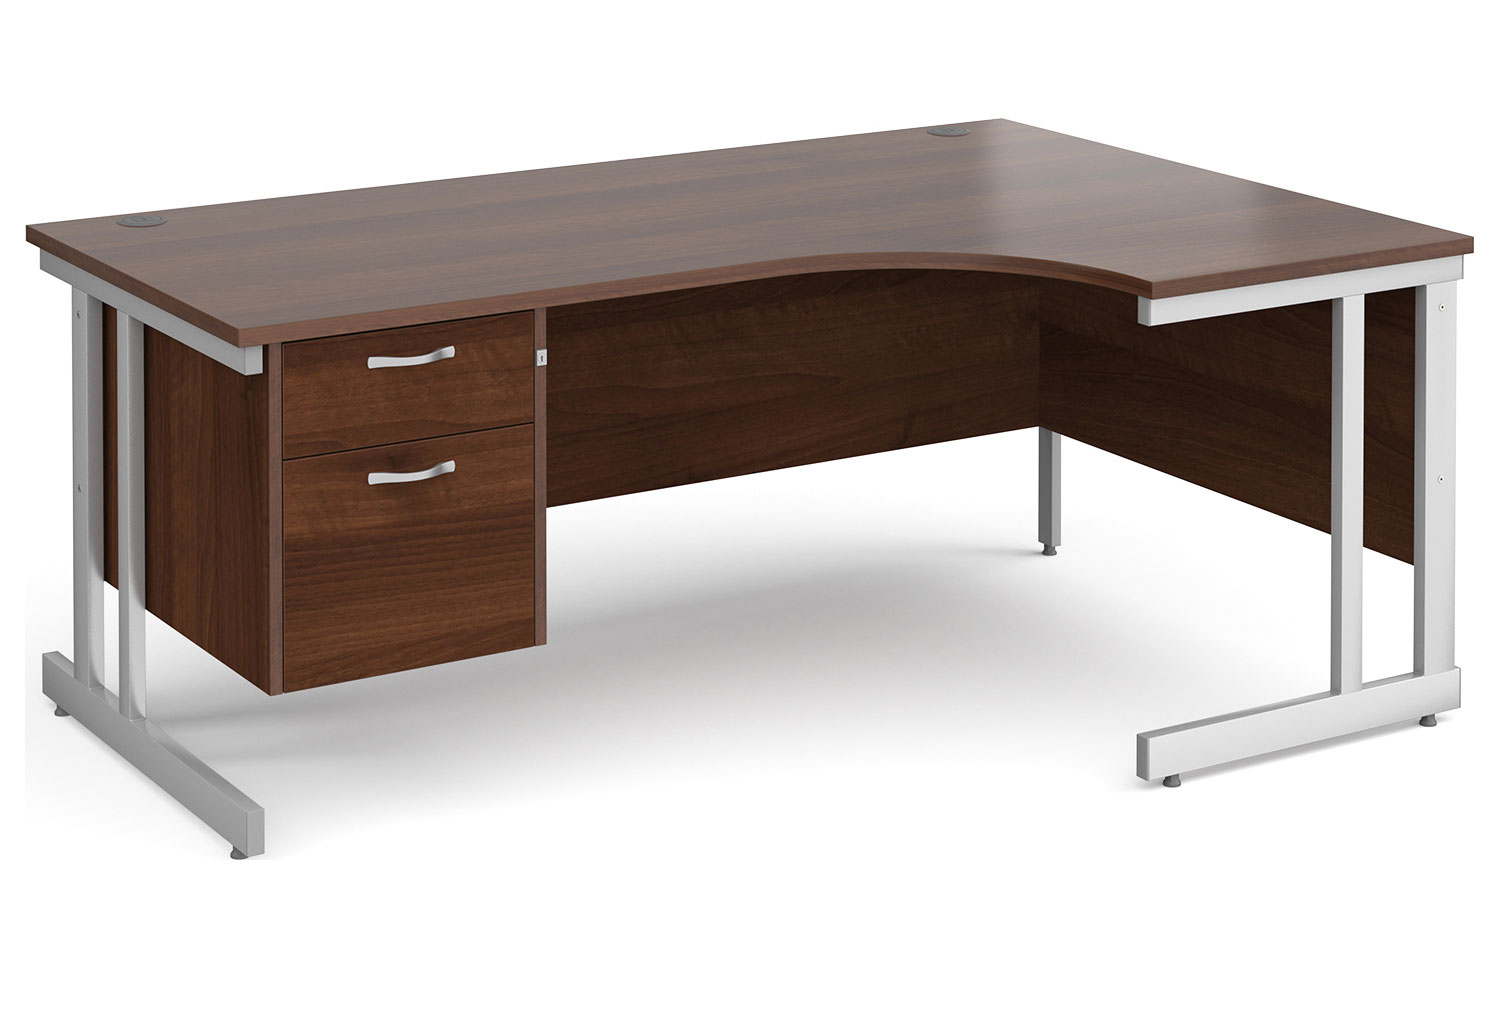 All Walnut Double C-Leg Right Hand Ergo Office Desk 2 Drawers, 180wx120/80dx73h (cm), Express Delivery